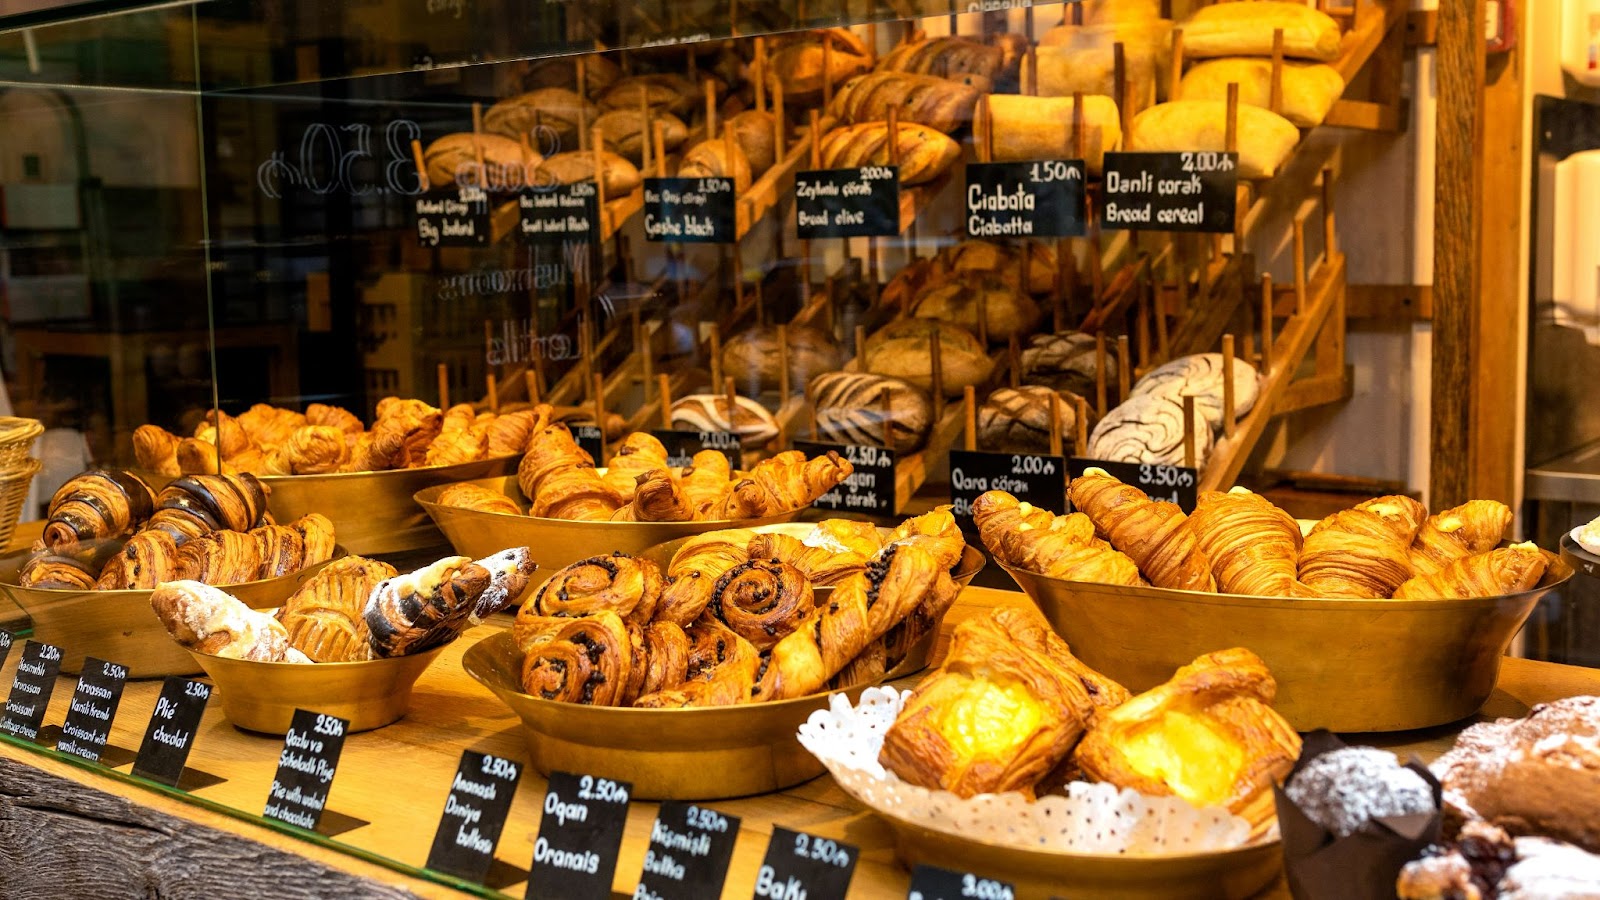 Display of mixed pastries and breads in a bakery